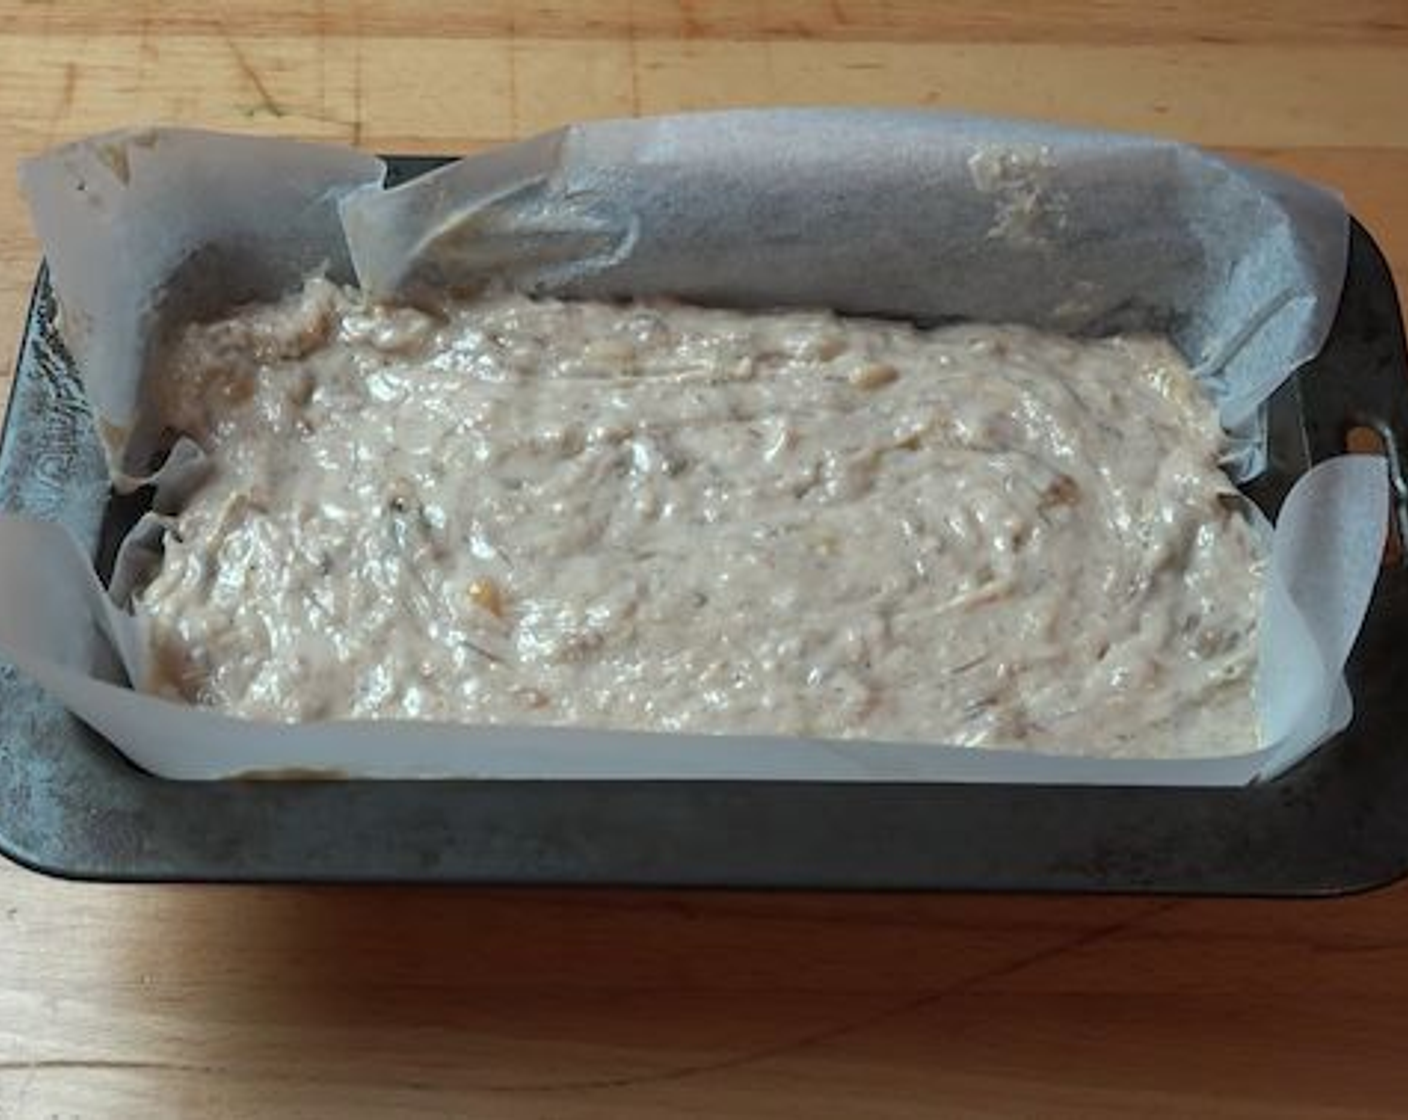 step 5 Pour your batter into the baking pan and smoothen out the top of the batter. Place into your oven and bake for 45-50 minutes or until a skewer inserted into the center of the banana bread comes out clean.